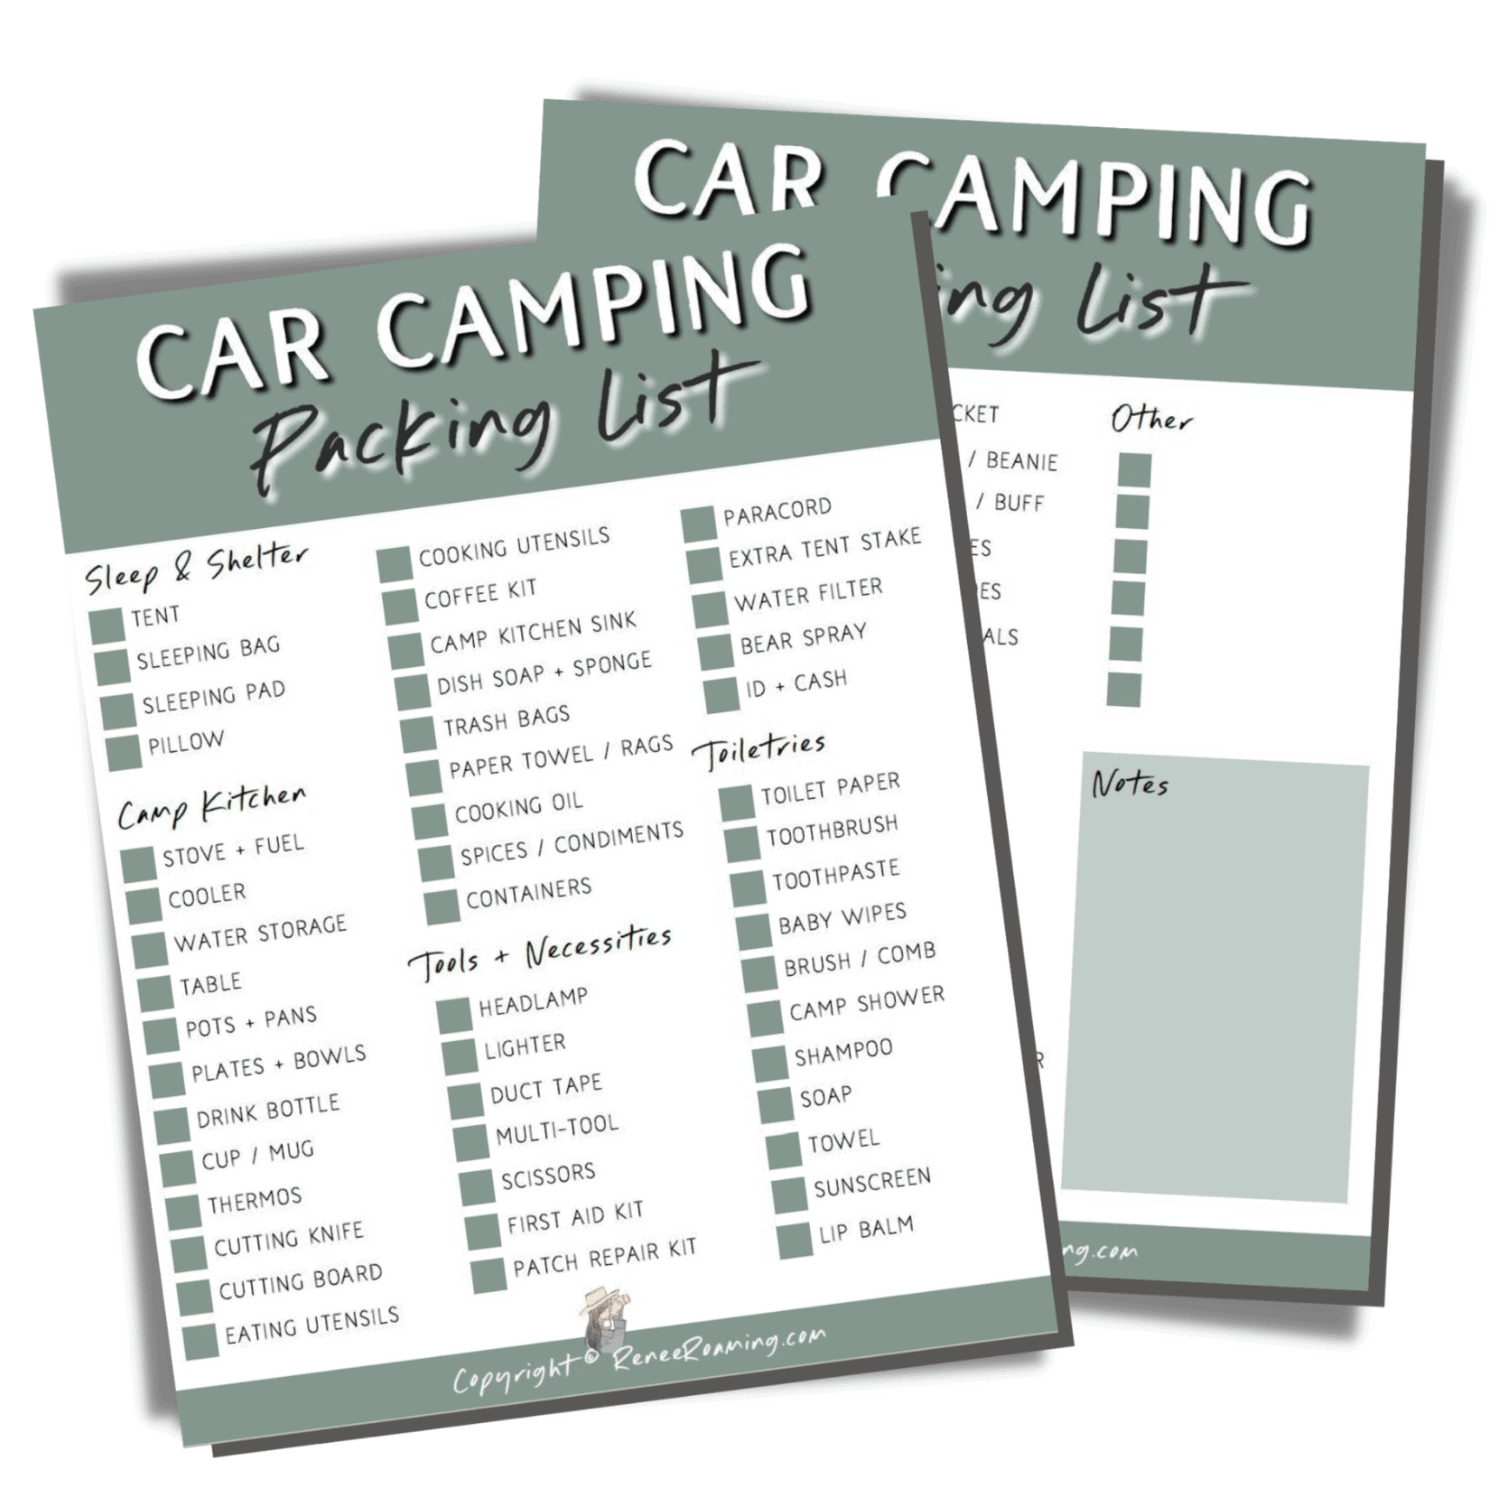 Car Camping Packing List Final